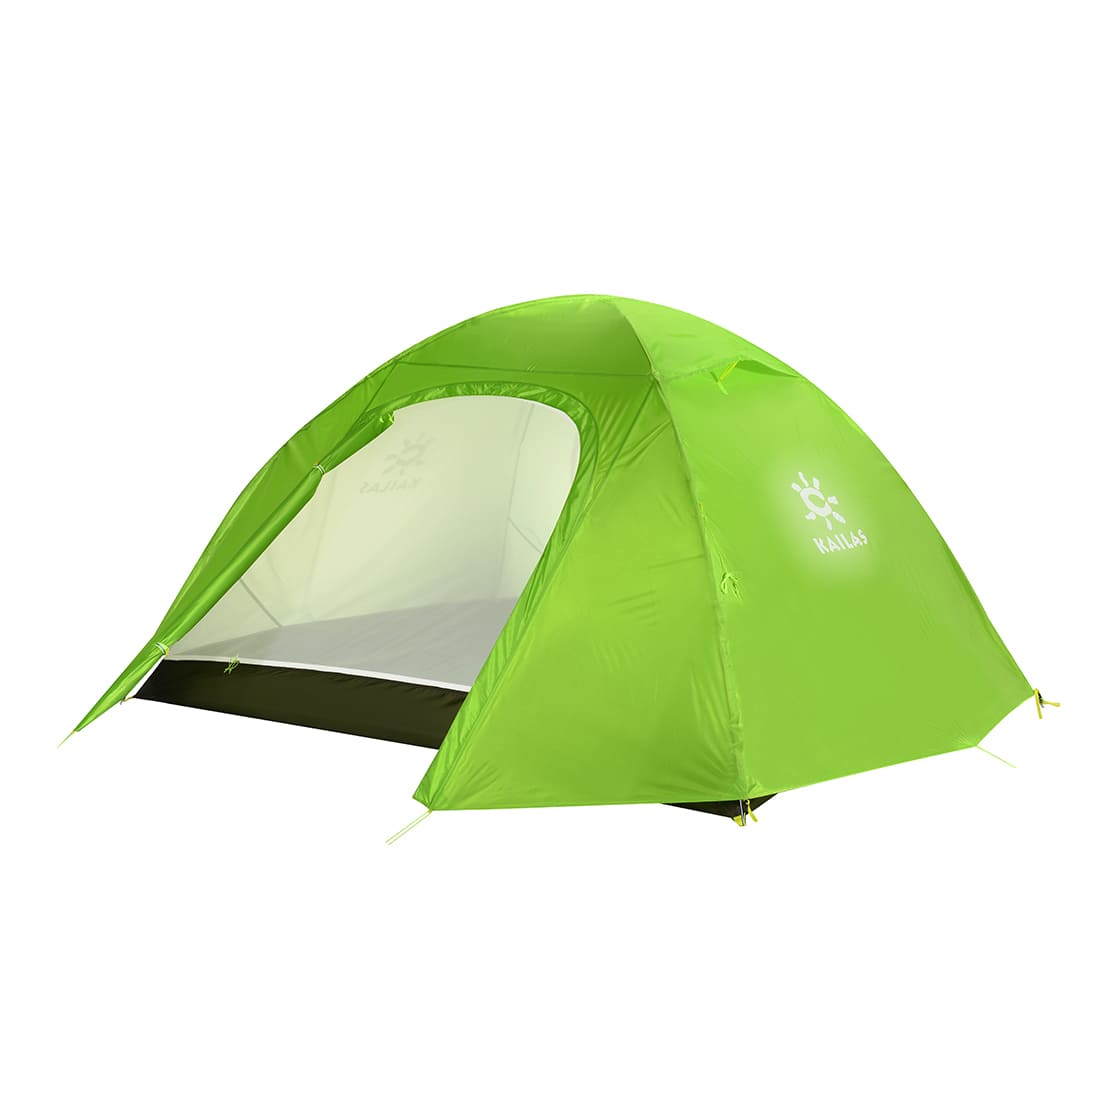 Kailas Triones Camping Tent 3P